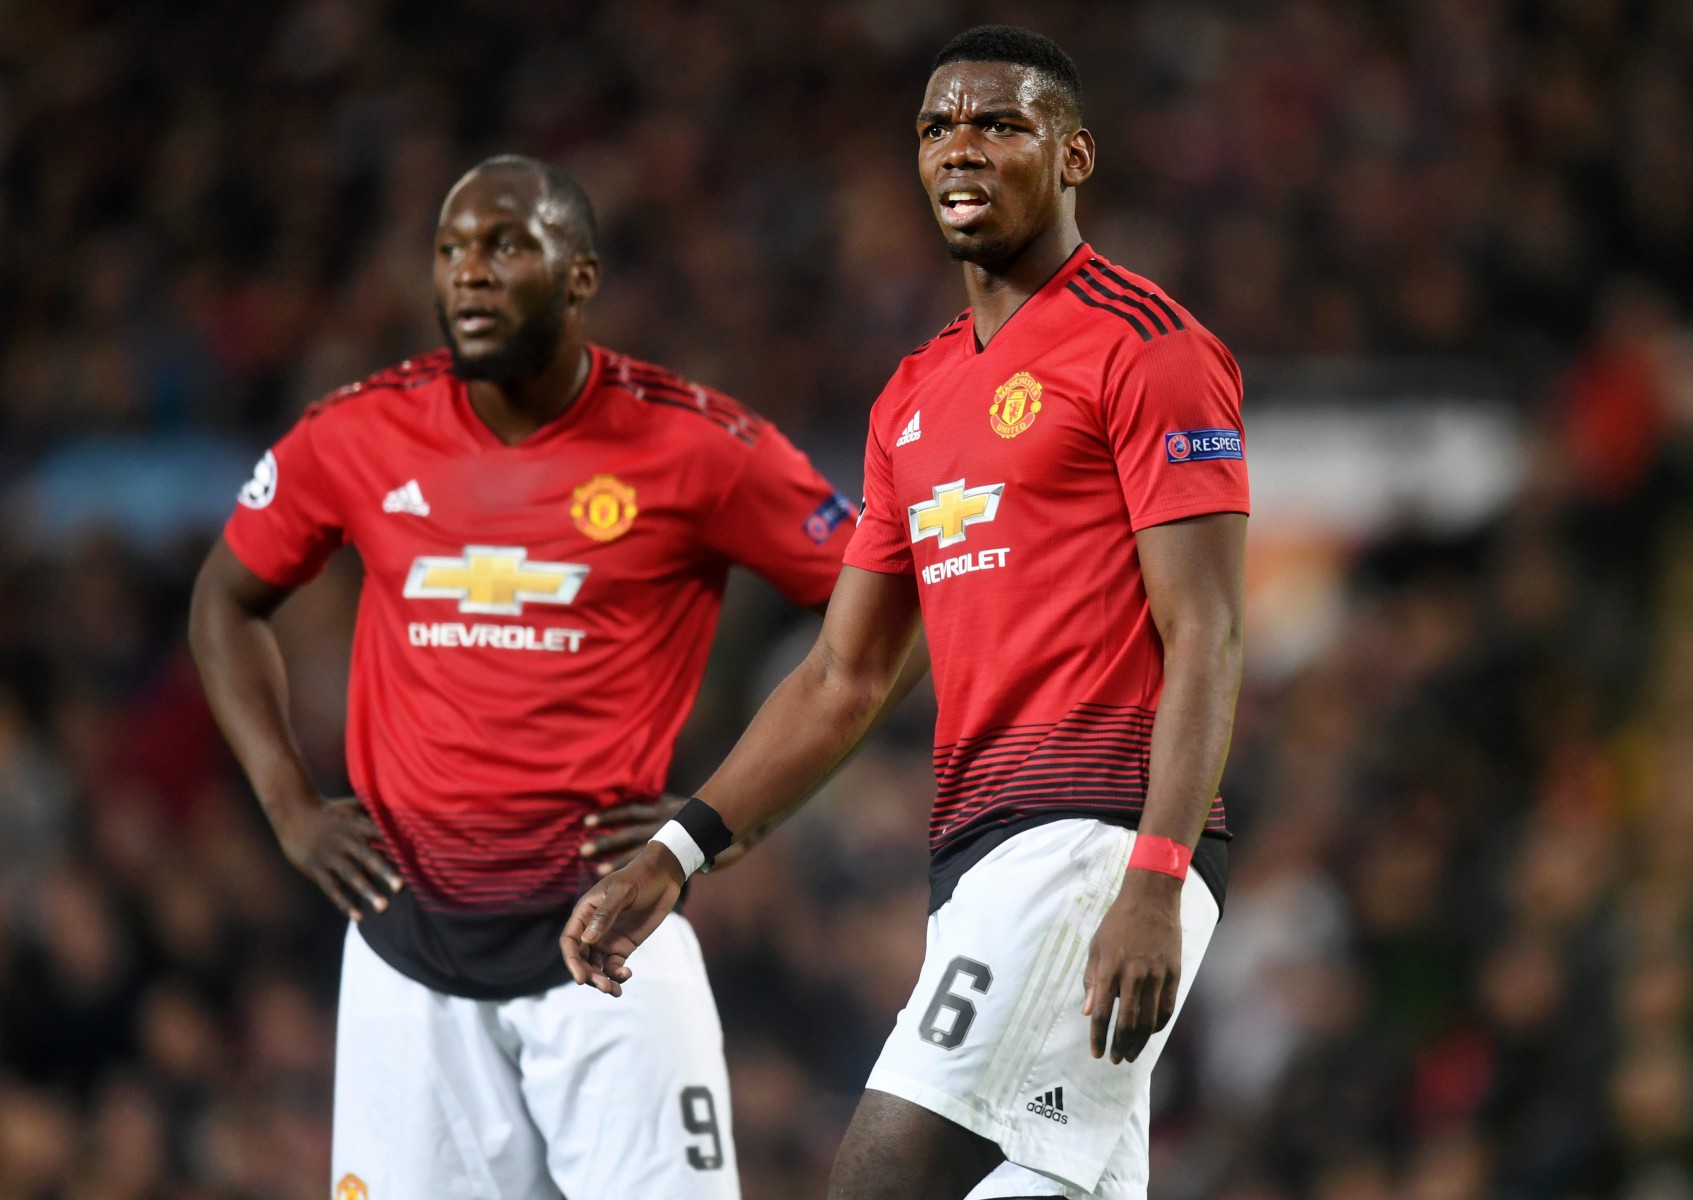 , Lukaku told ex-Man Utd pal Pogba I was done as he got set to leave Old Trafford for Inter Milan transfer